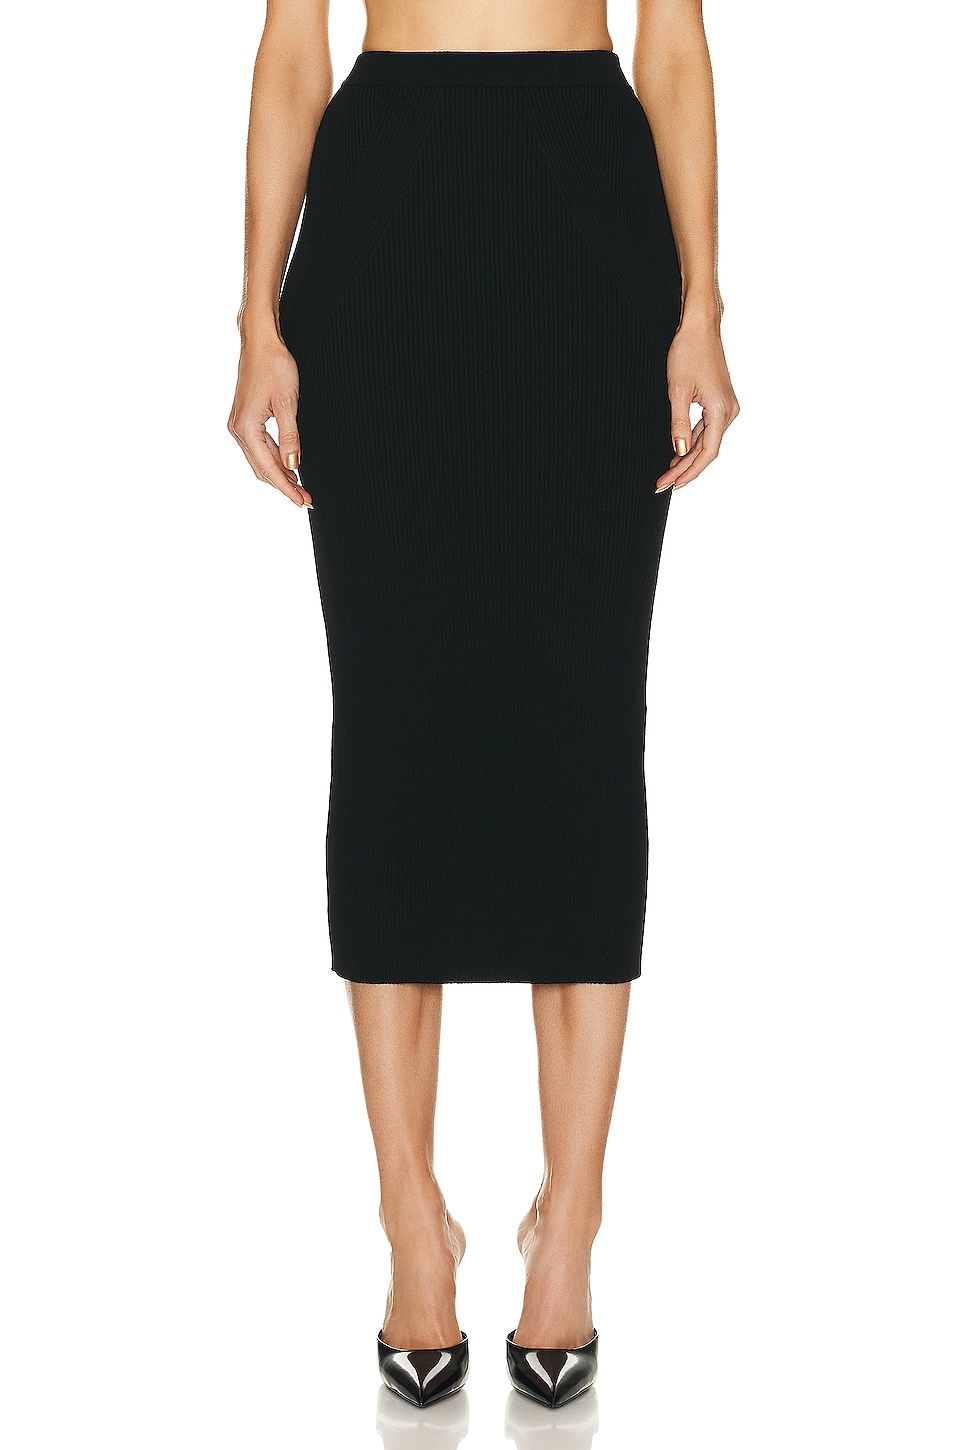 Image 1 of Alexander McQueen High Waisted Pencil Midi Skirt in Black